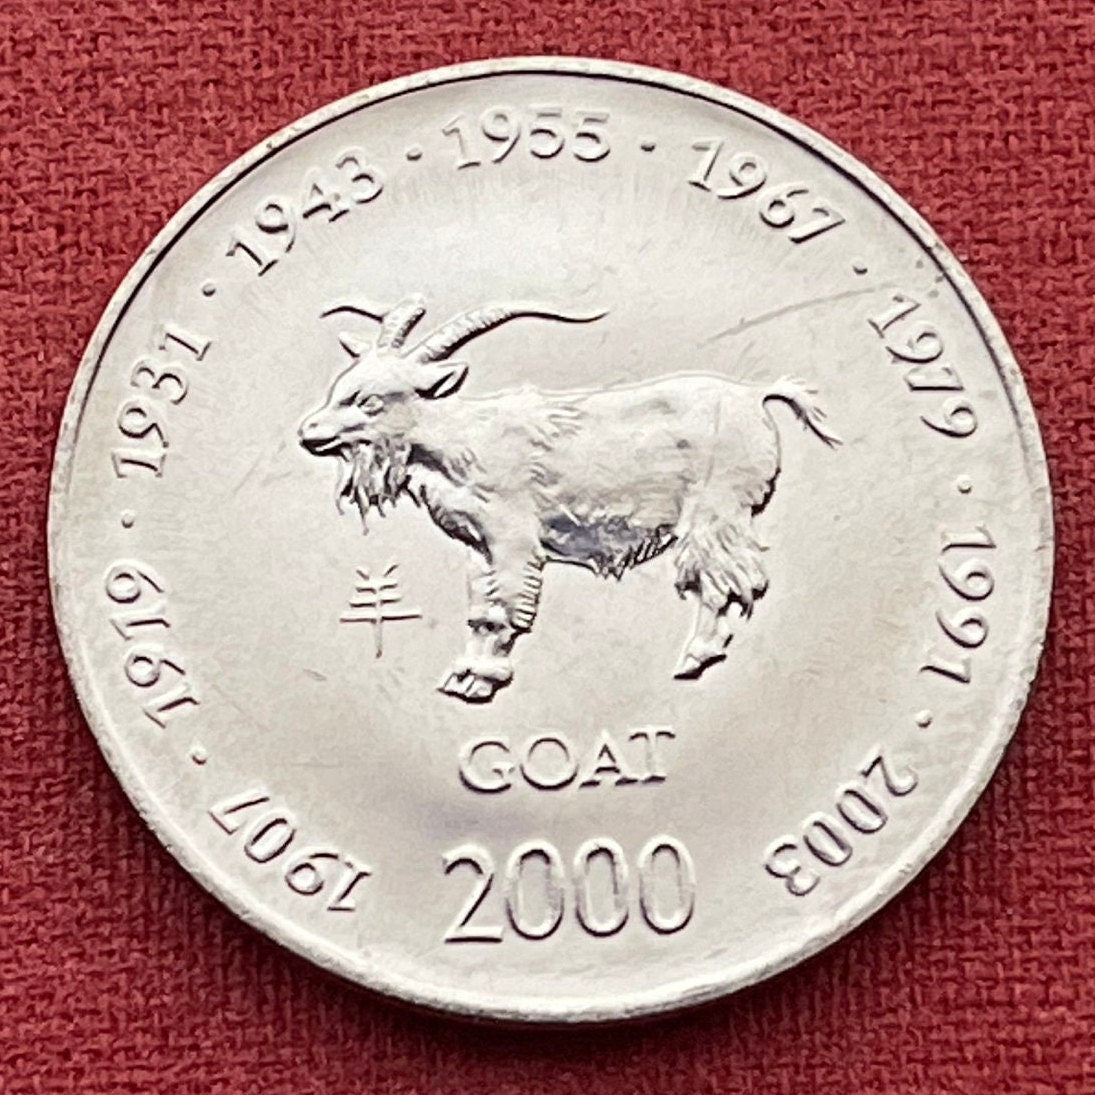 Year of the Goat Chinese Zodiac 10 Shillings Somalia Authentic Coin Money for Jewelry and Craft Making 1955 1967 1979 1991 2003